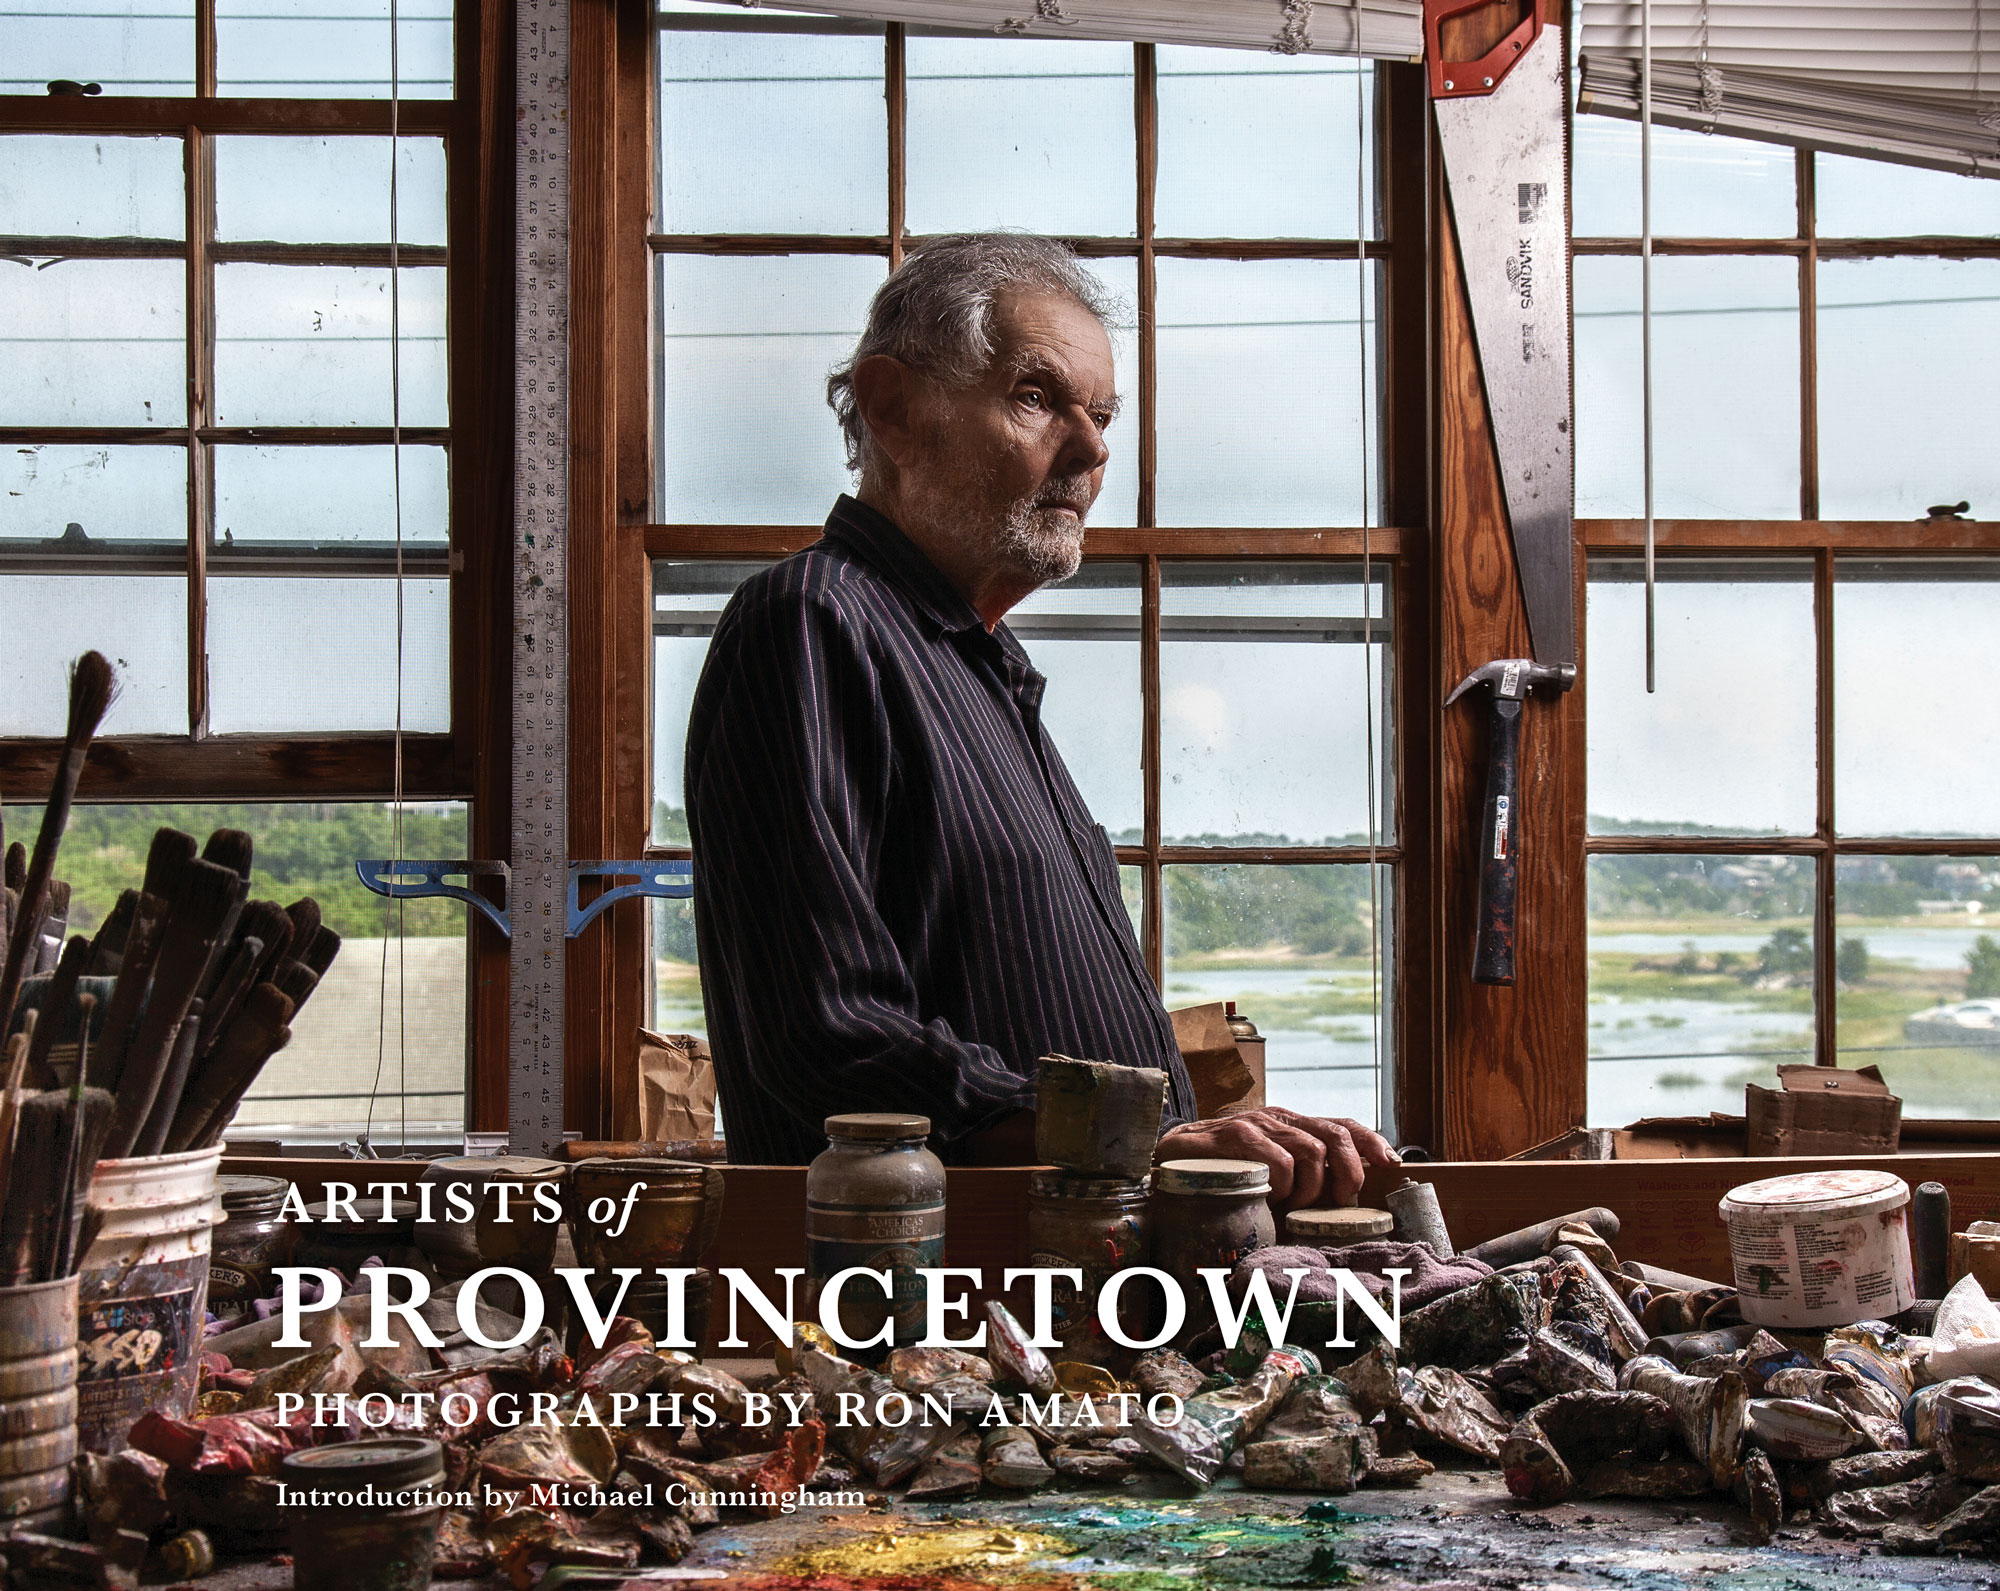 Artists of Provincetown by Ron Amato book cover.